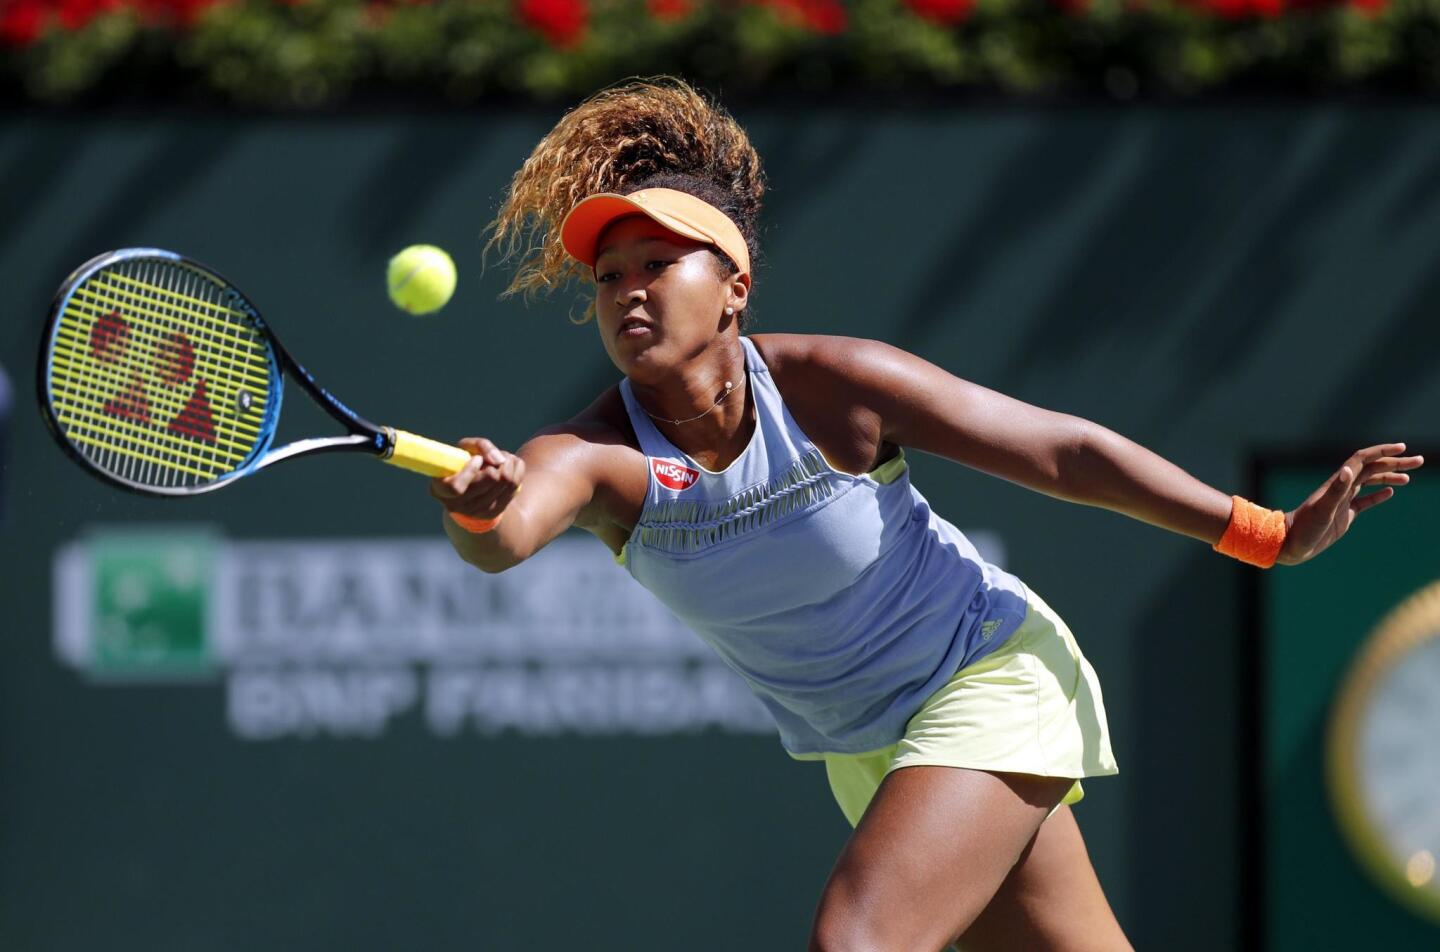 MAN08. Indian Wells (United States), 18/03/2018.- Naomi Osaka from Japan in action against Daria Kasatkina from Russia in their finals match of the BNP Paribas Open at the Indian Wells Tennis Garden in Indian Wells, California, USA, 18 March 2018. (Abierto, Tenis, Rusia, Japón, Estados Unidos) EFE/EPA/JOHN G. MABANGLO ** Usable by HOY and SD Only **